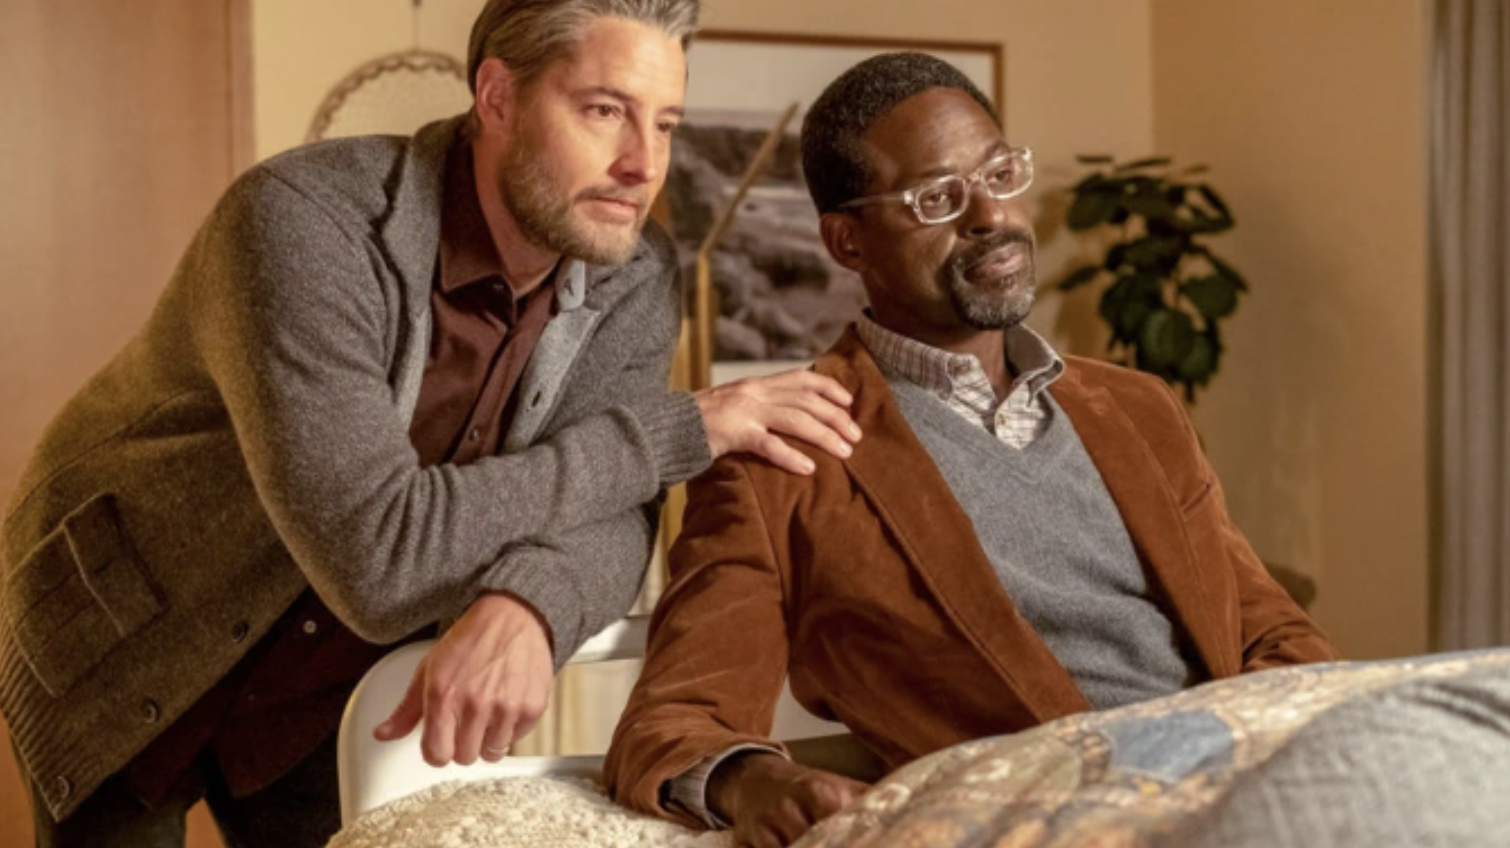 This Is Us Too: 6.17 – “The Train” Part: 2